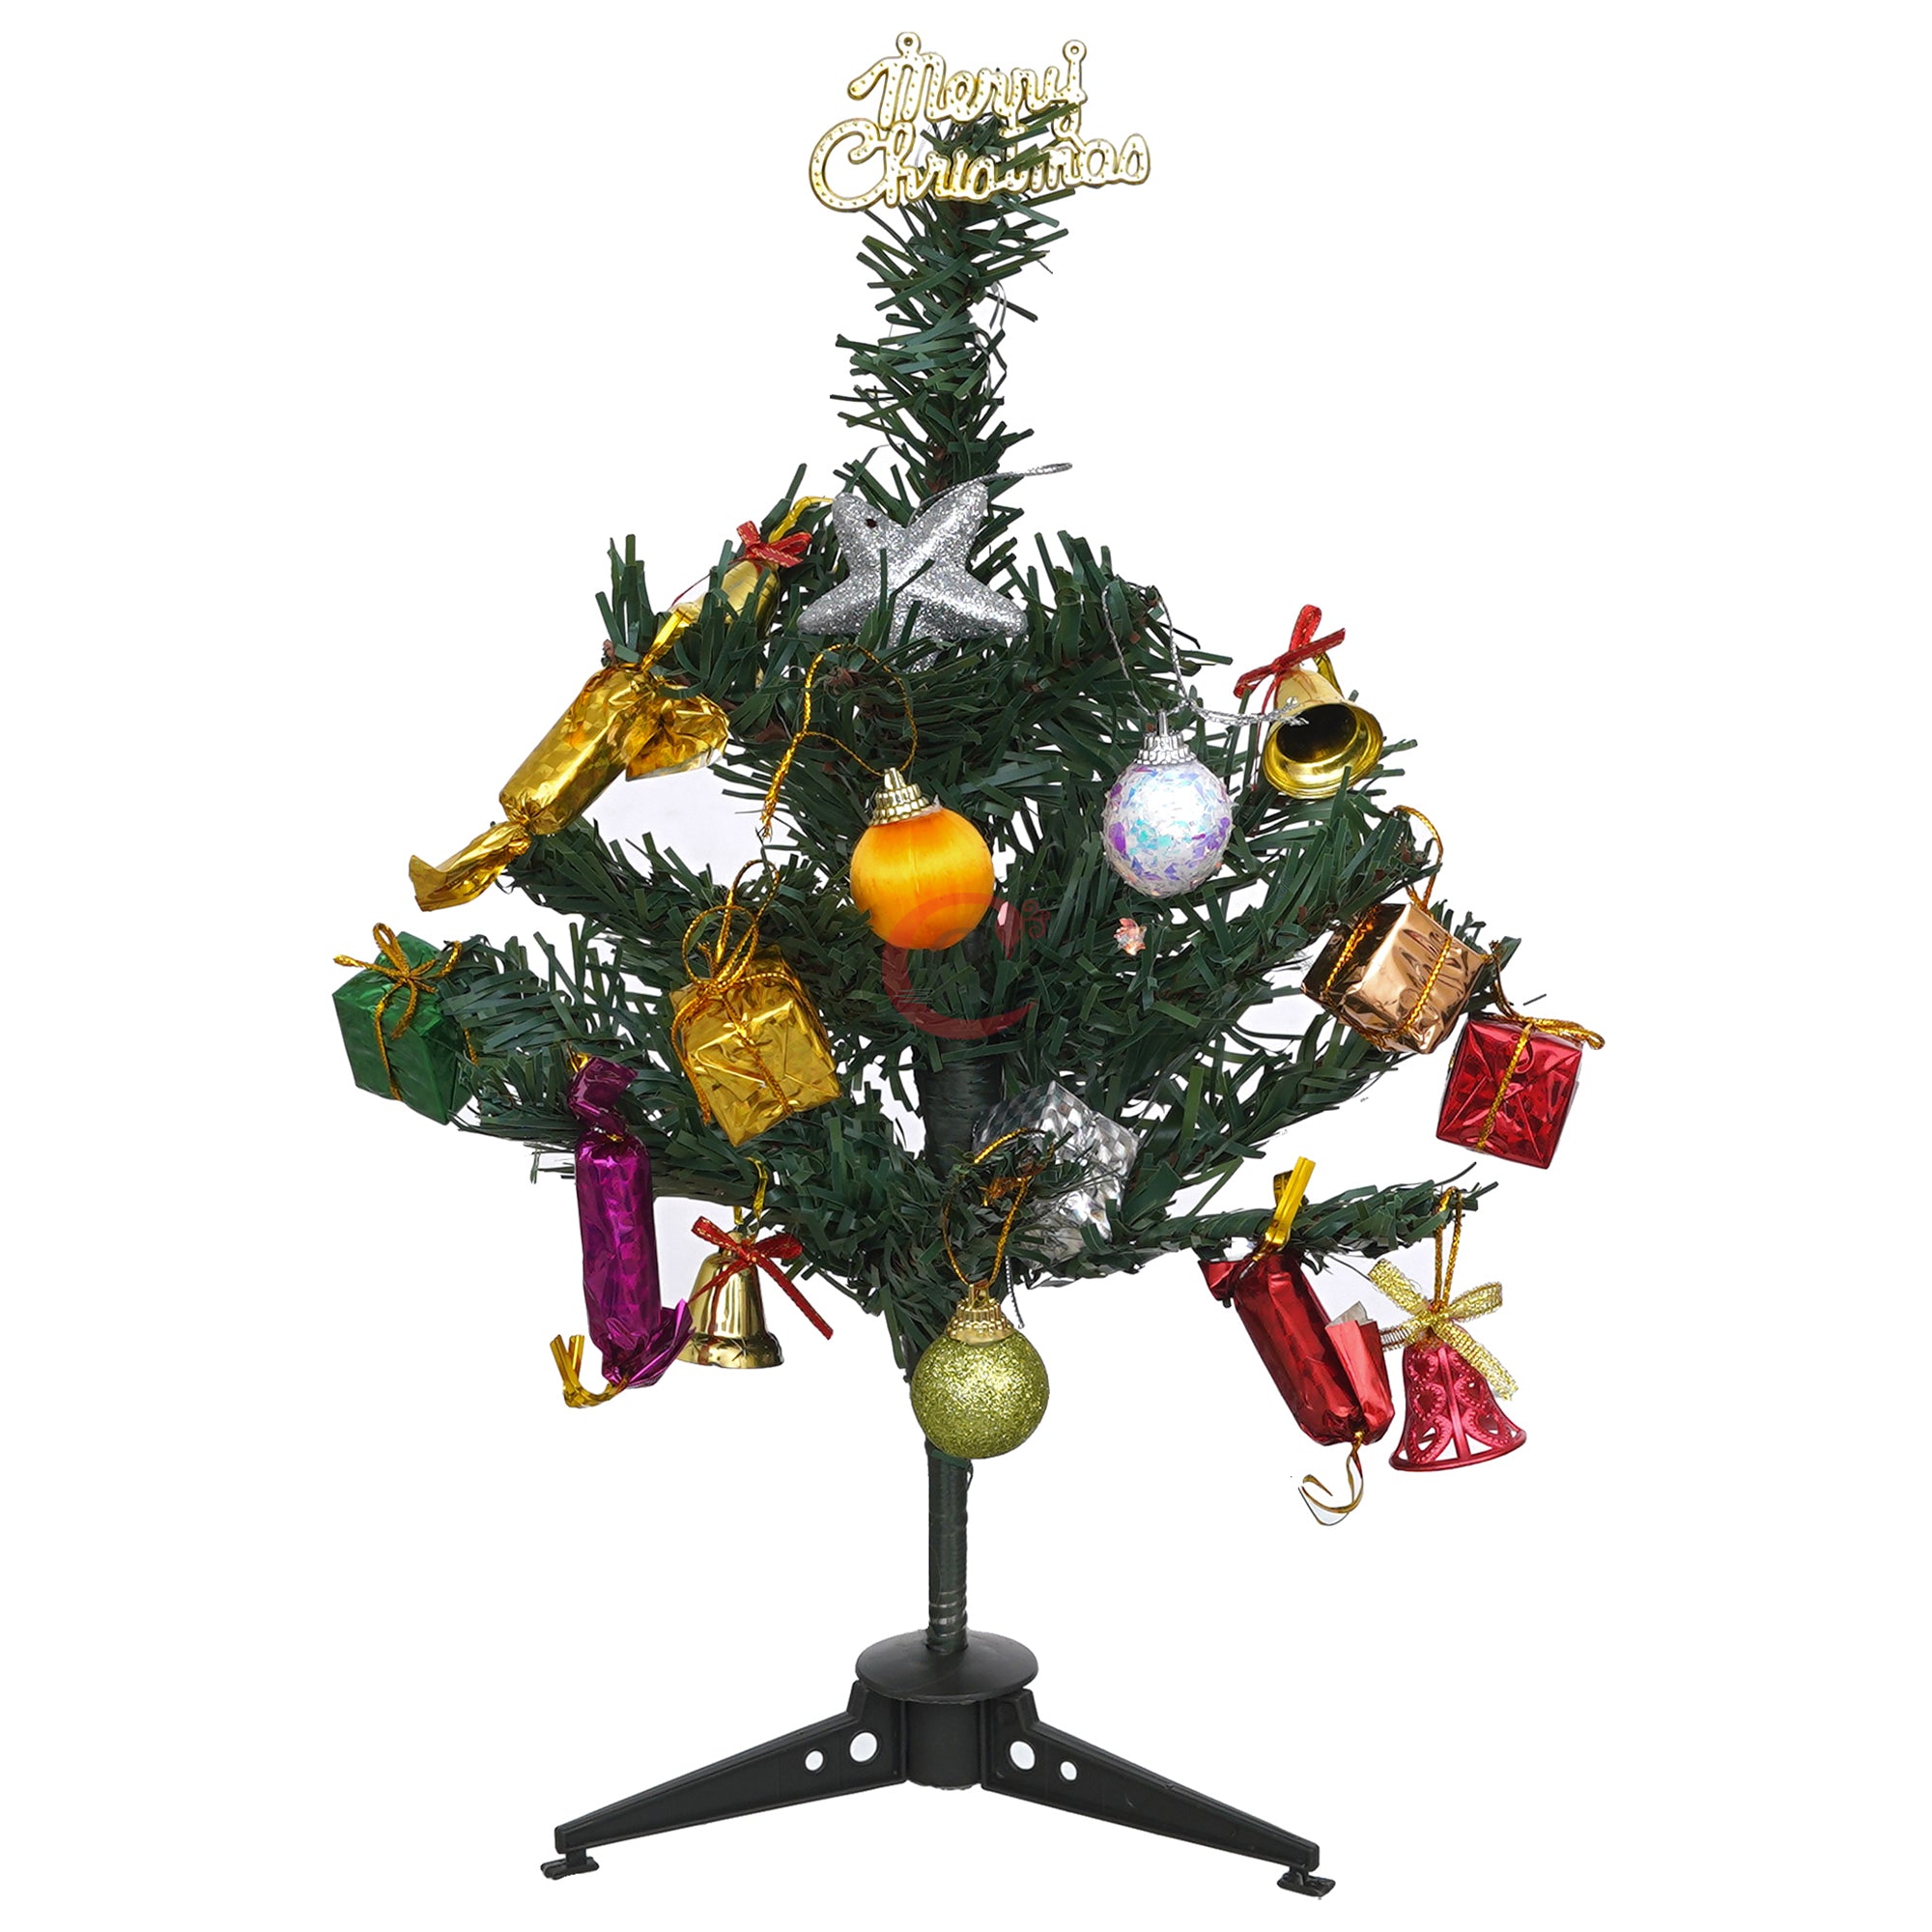 eCraftIndia 1 Feet Green Artificial Christmas Tree Xmas Pine Tree with Metal Stand - Xmas Tree for Indoor, Outdoor, Home, Living Room, Office, Church Decor - Merry Christmas Decoration Item 7